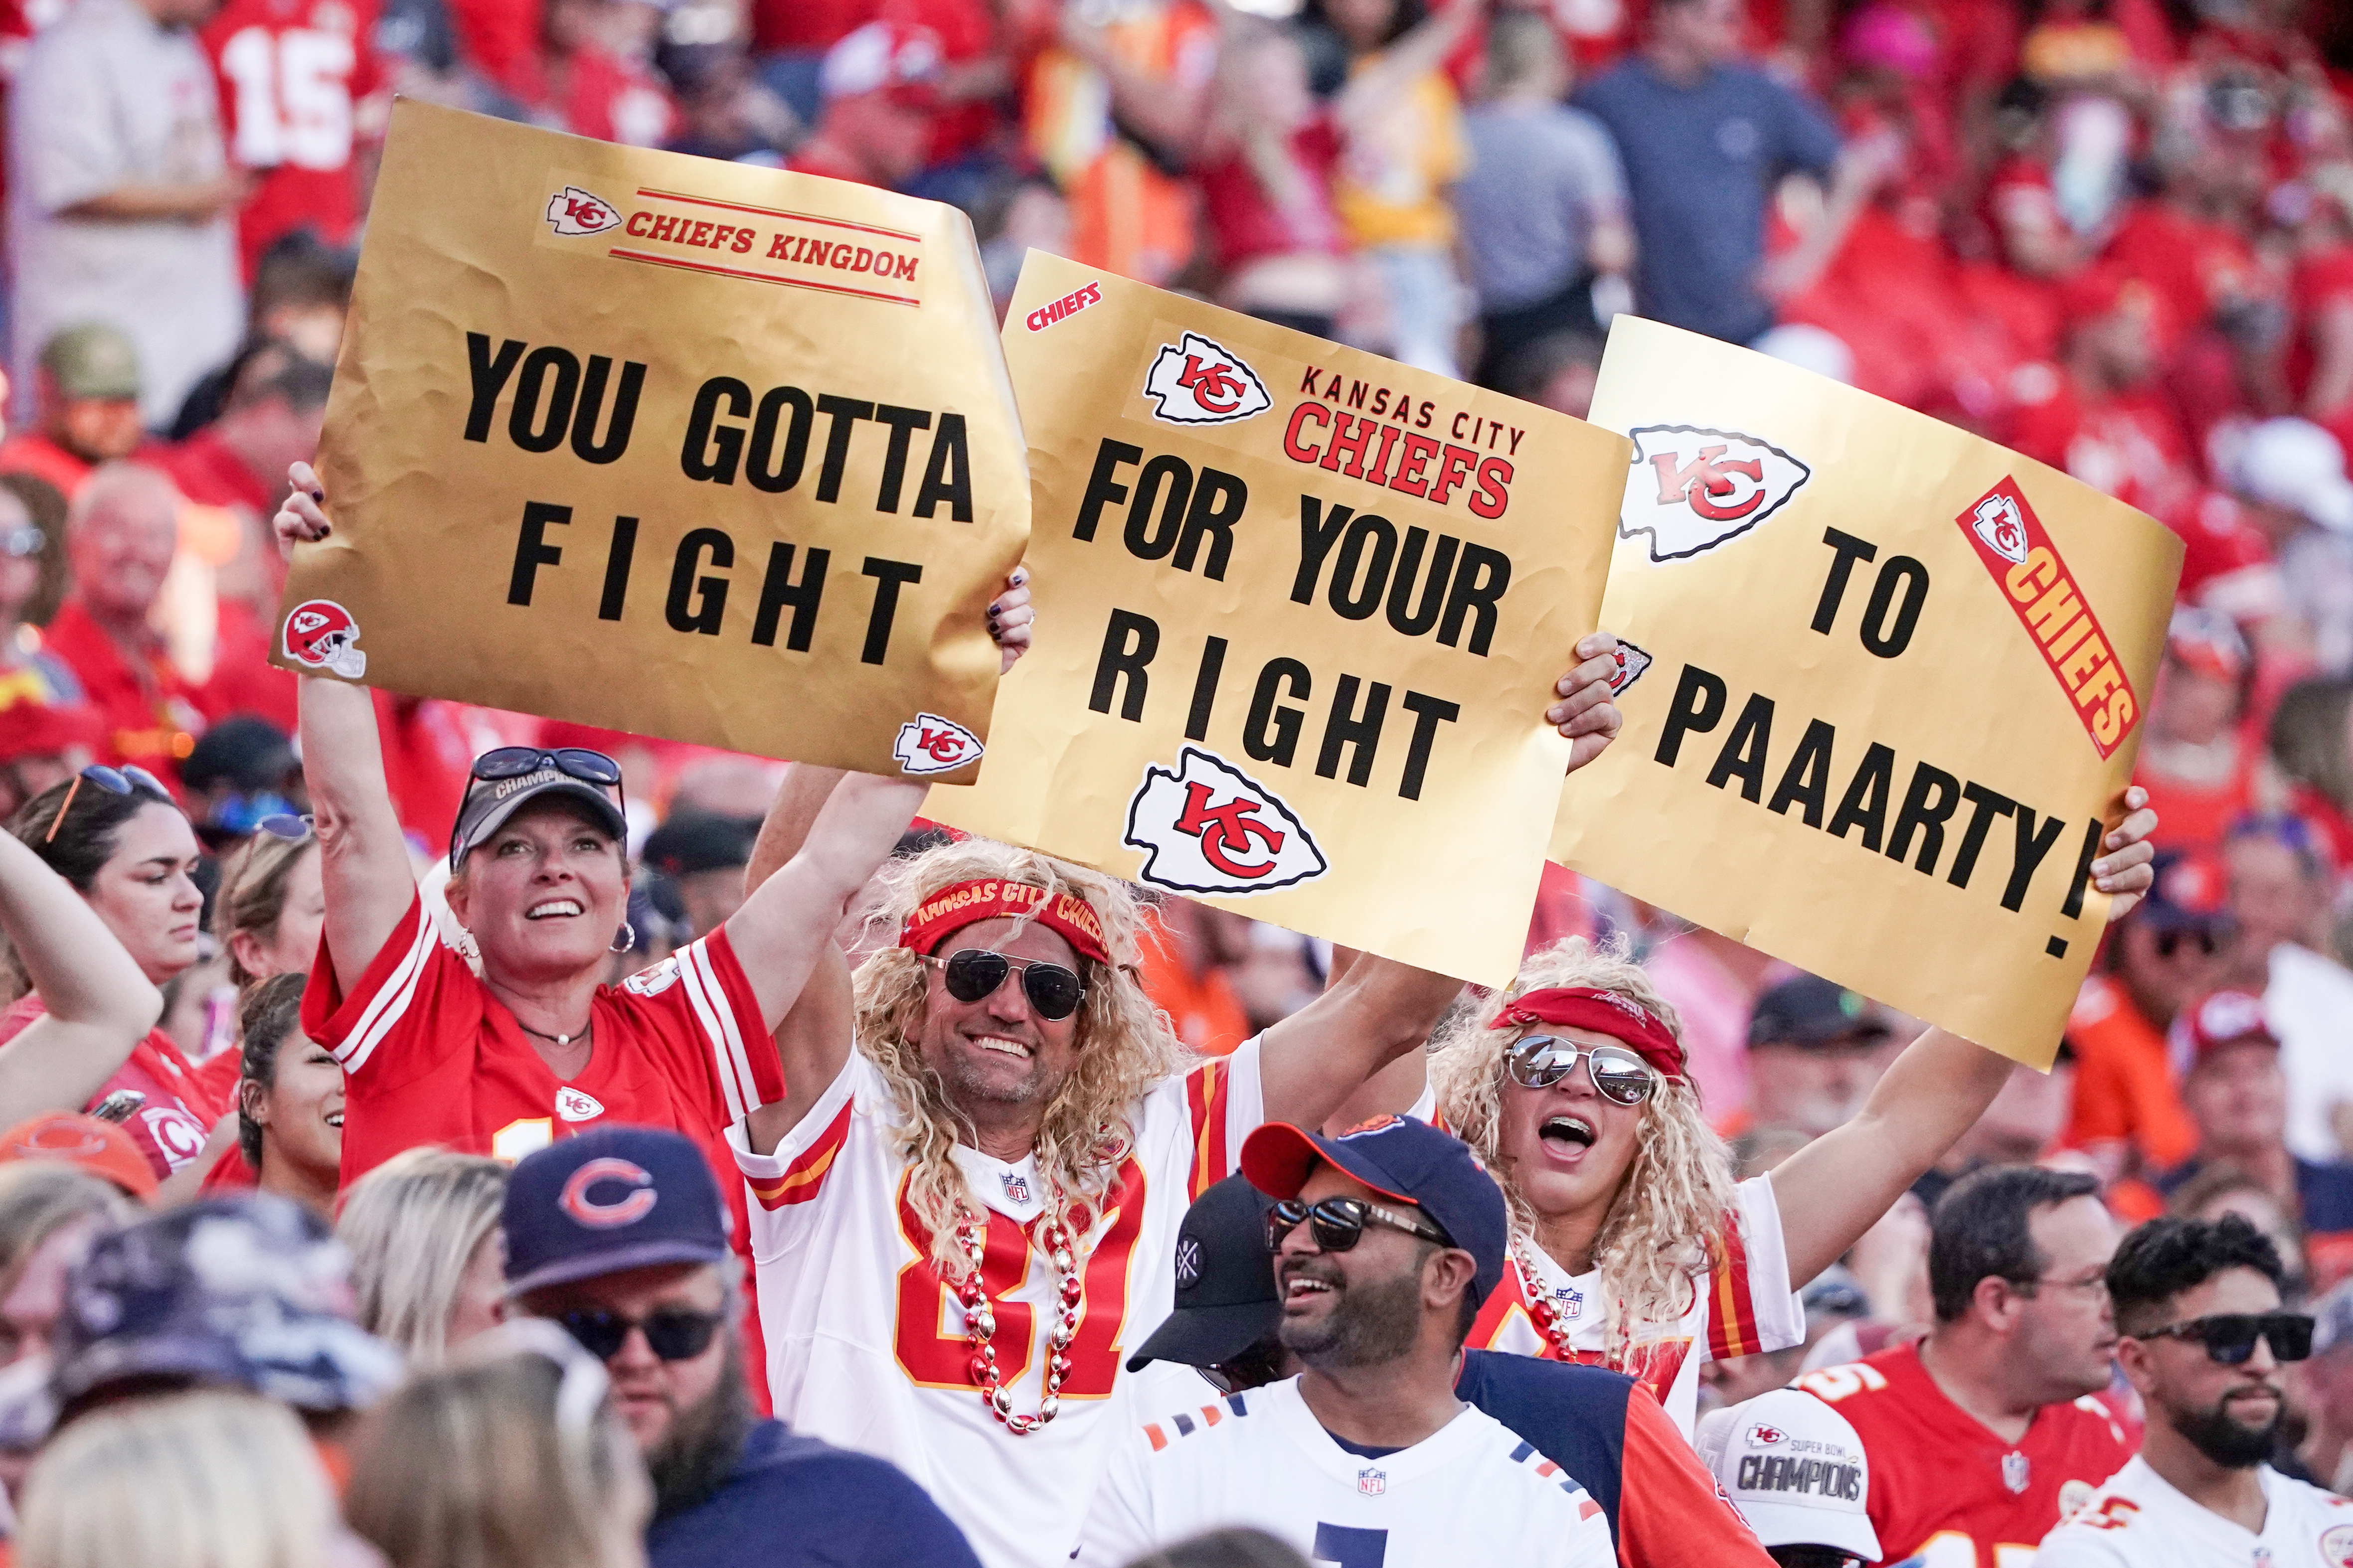 How To Bet - The Kansas City Chiefs Have the NFL's Most Faithful Fans